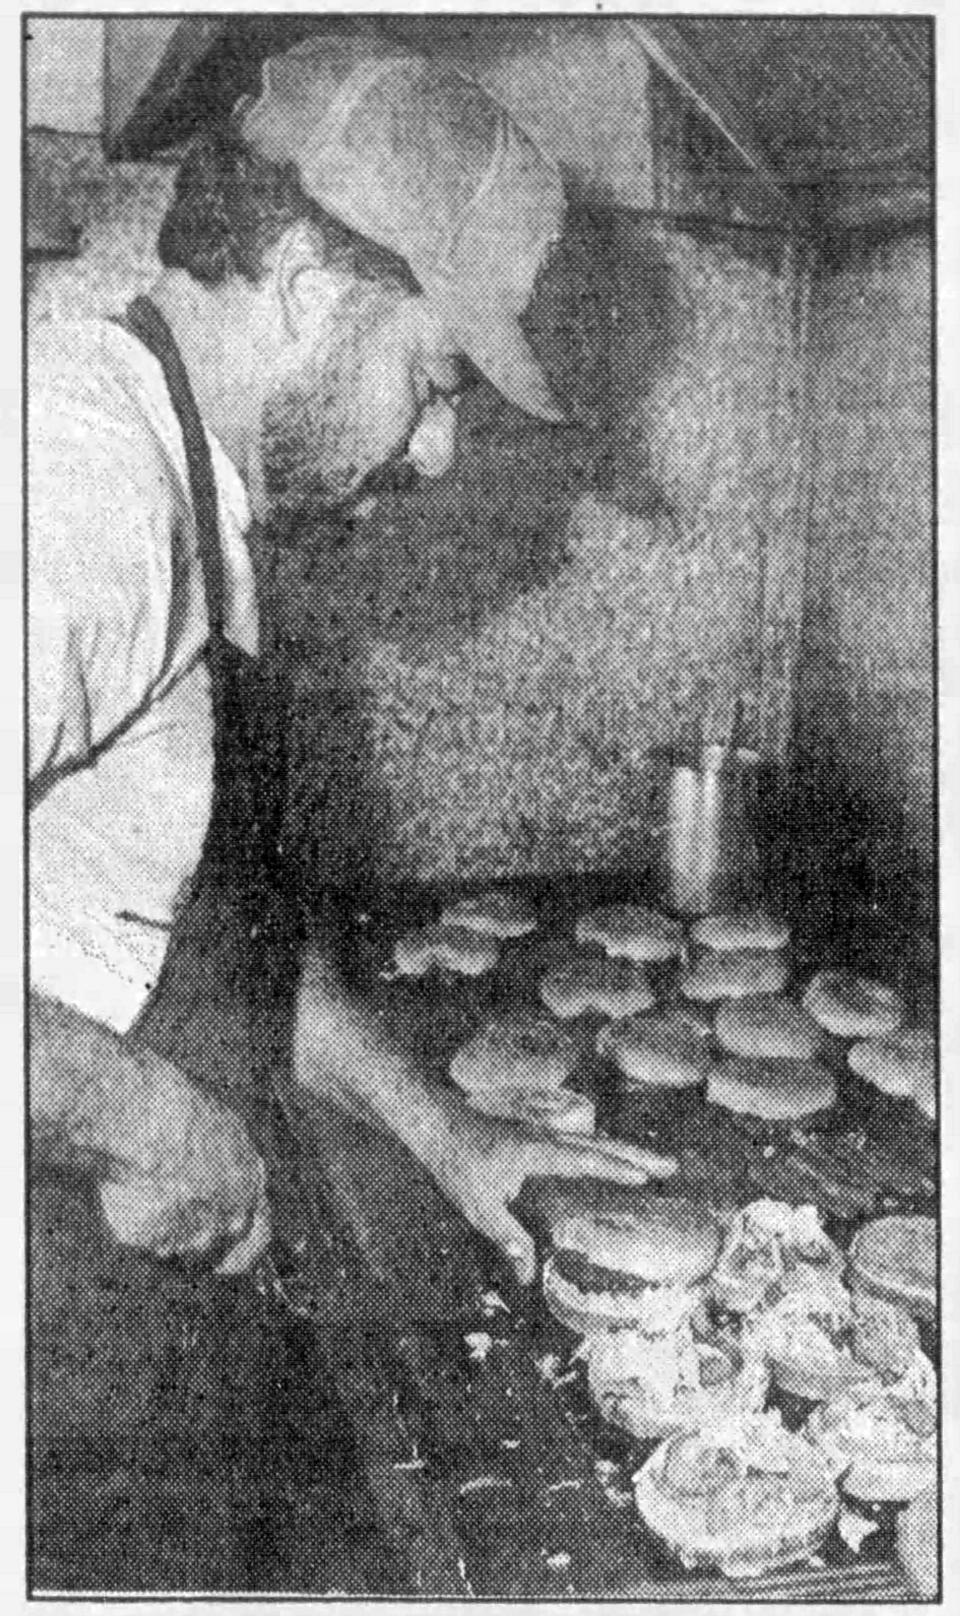 Aug. 30, 1989: Roger Carrasco Jr. learned the hamburger business from his father.